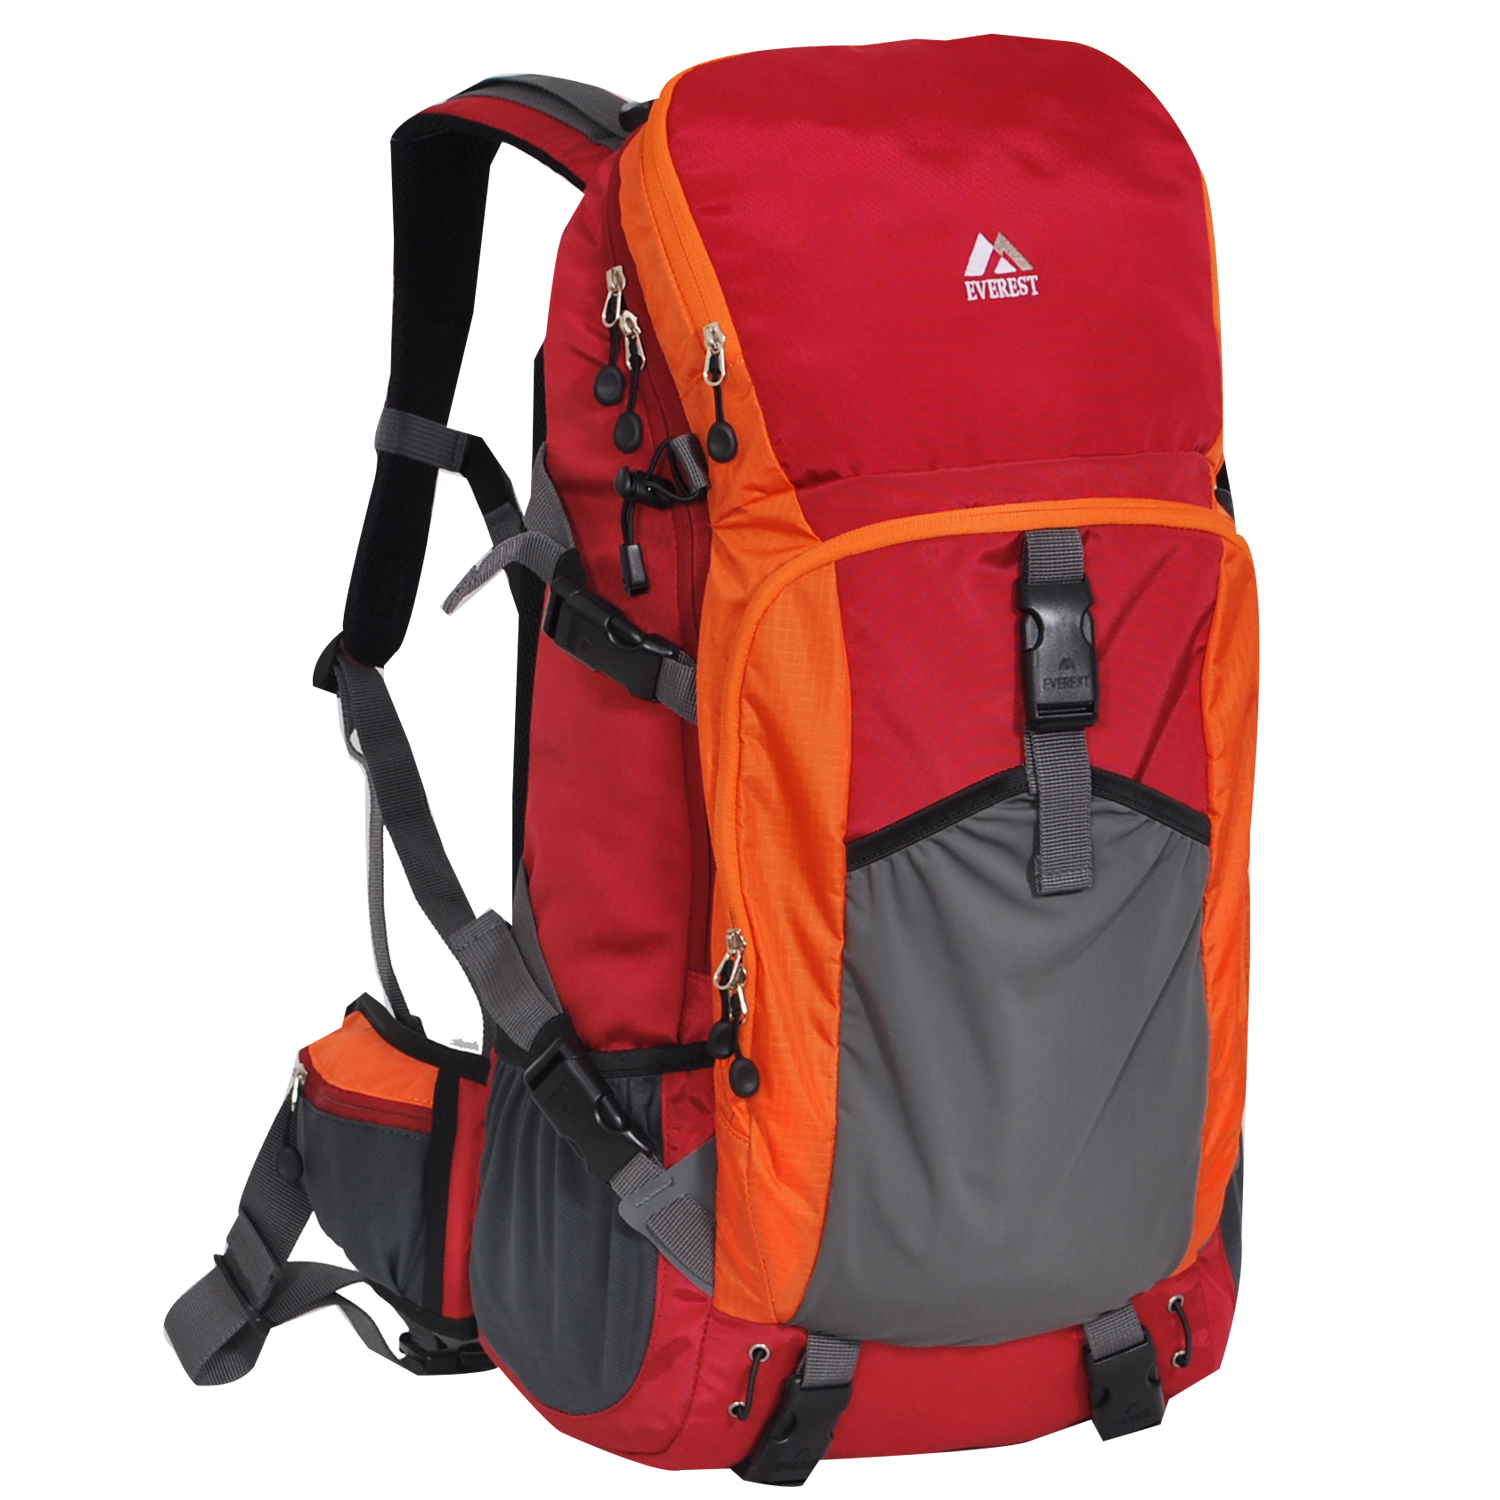 Everest Expedition Hiking Pack Red Orange - image 1 of 5